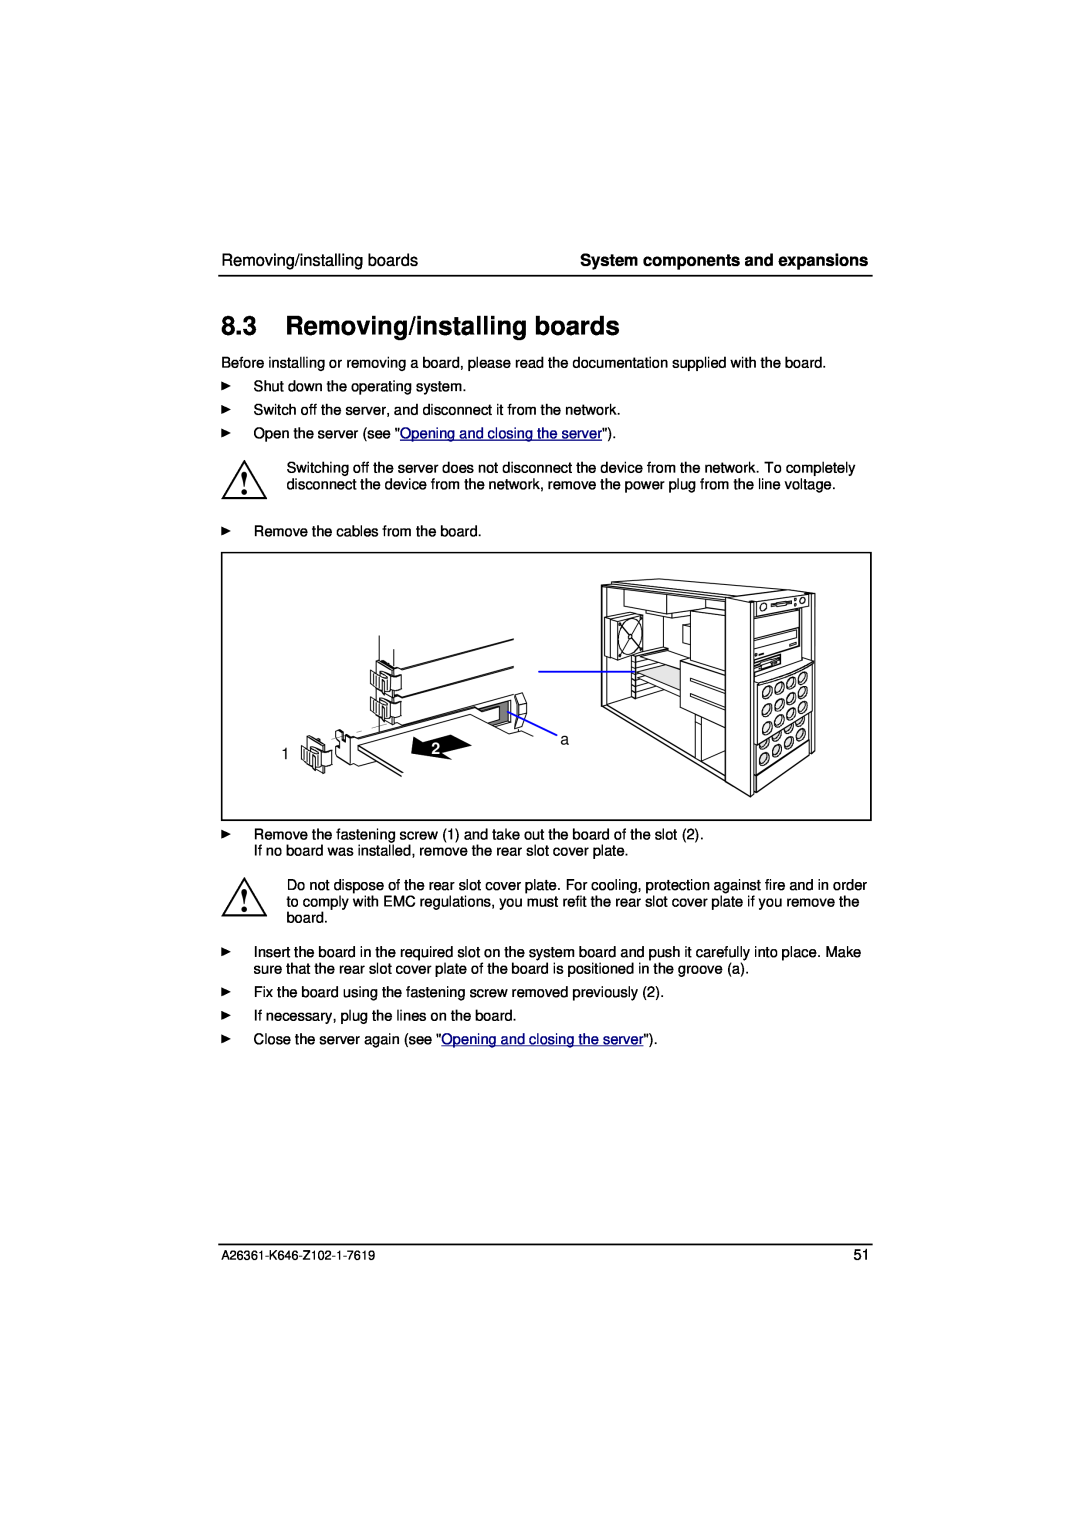 Fujitsu B120 manual Removing/installing boards, System components and expansions 